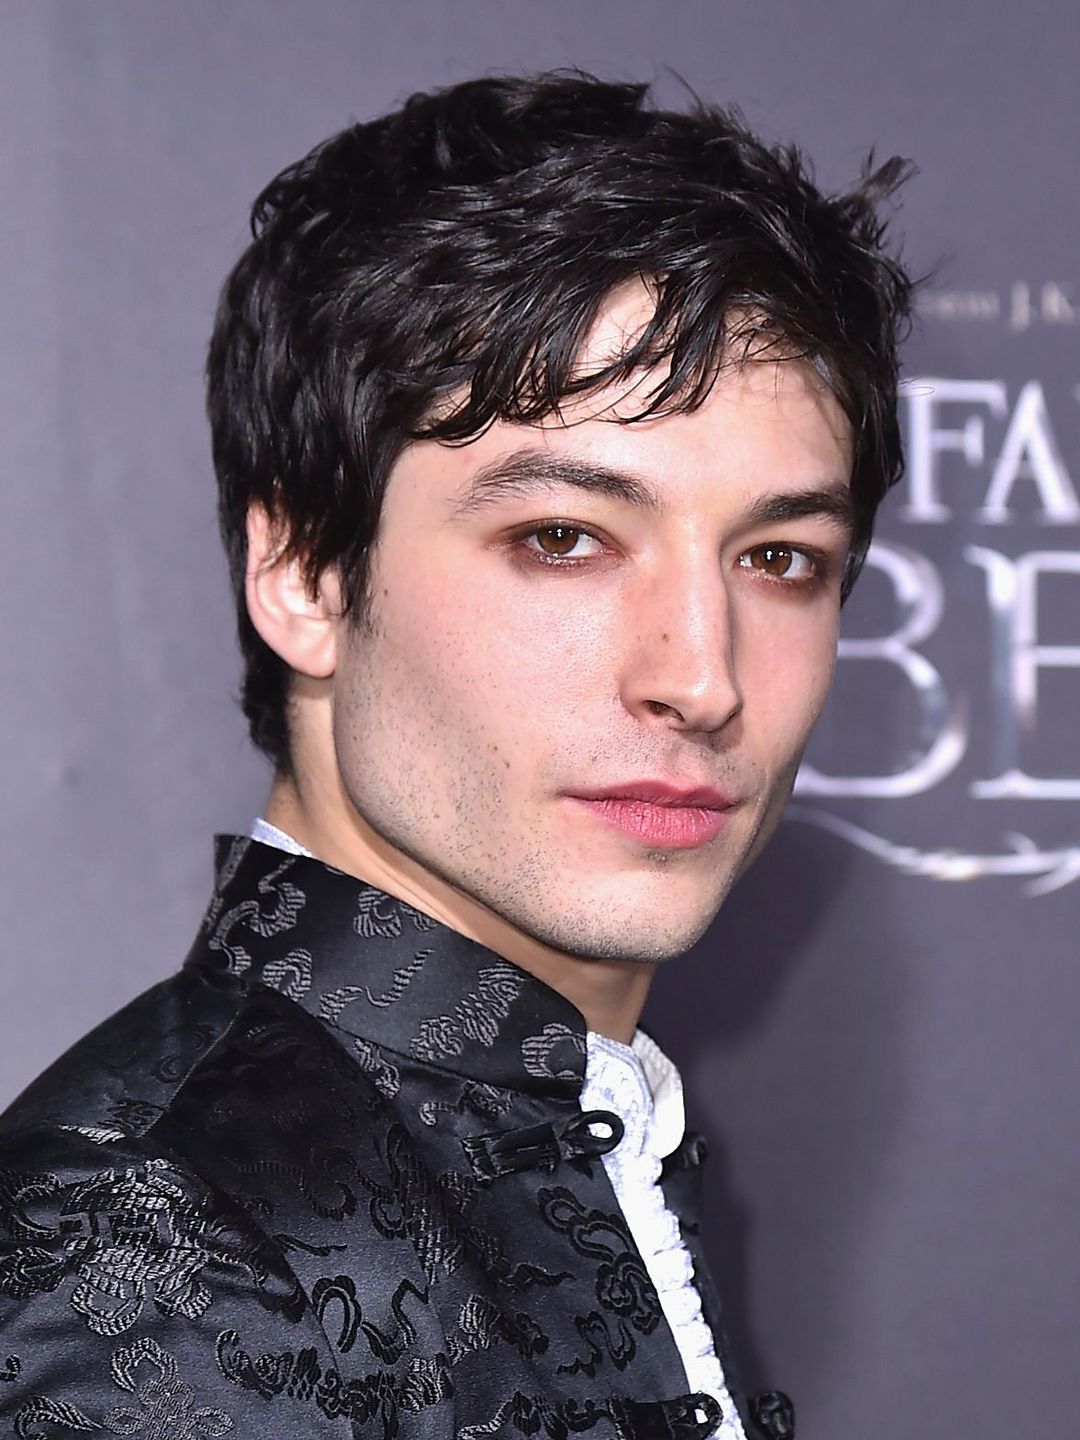 Ezra Miller does he have a wife